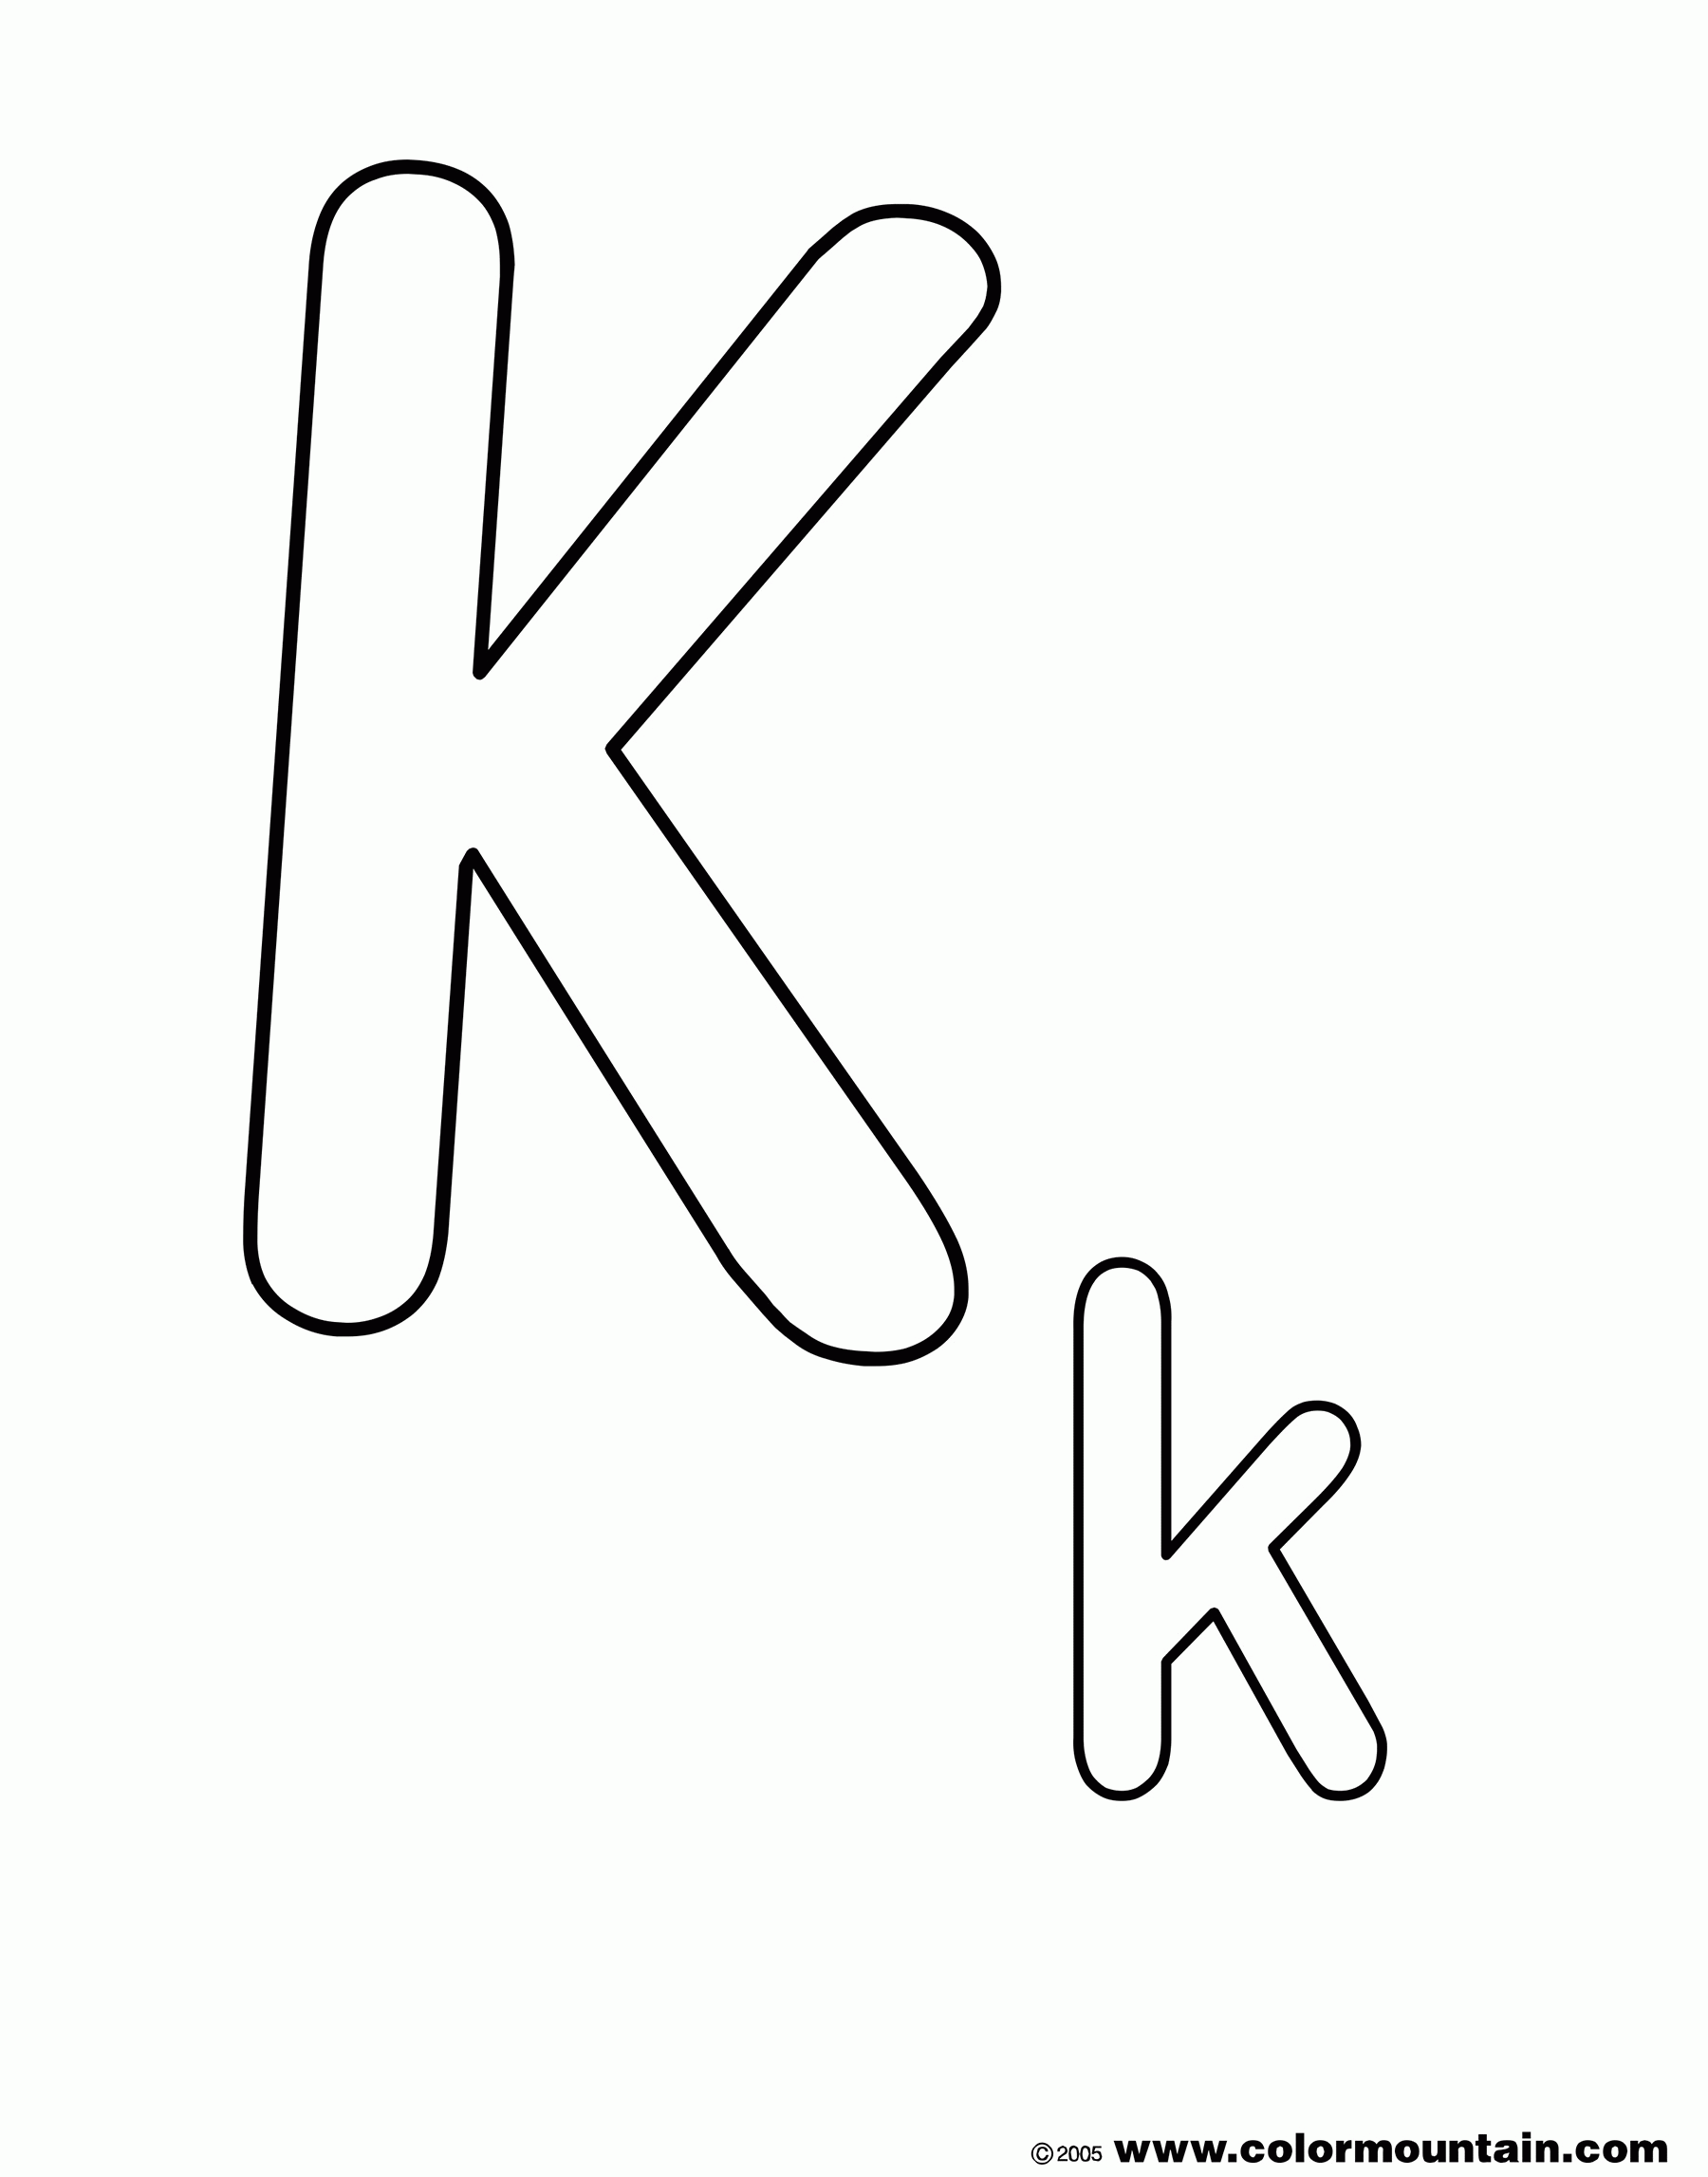 29-free-printable-letter-k-coloring-pages-for-adults